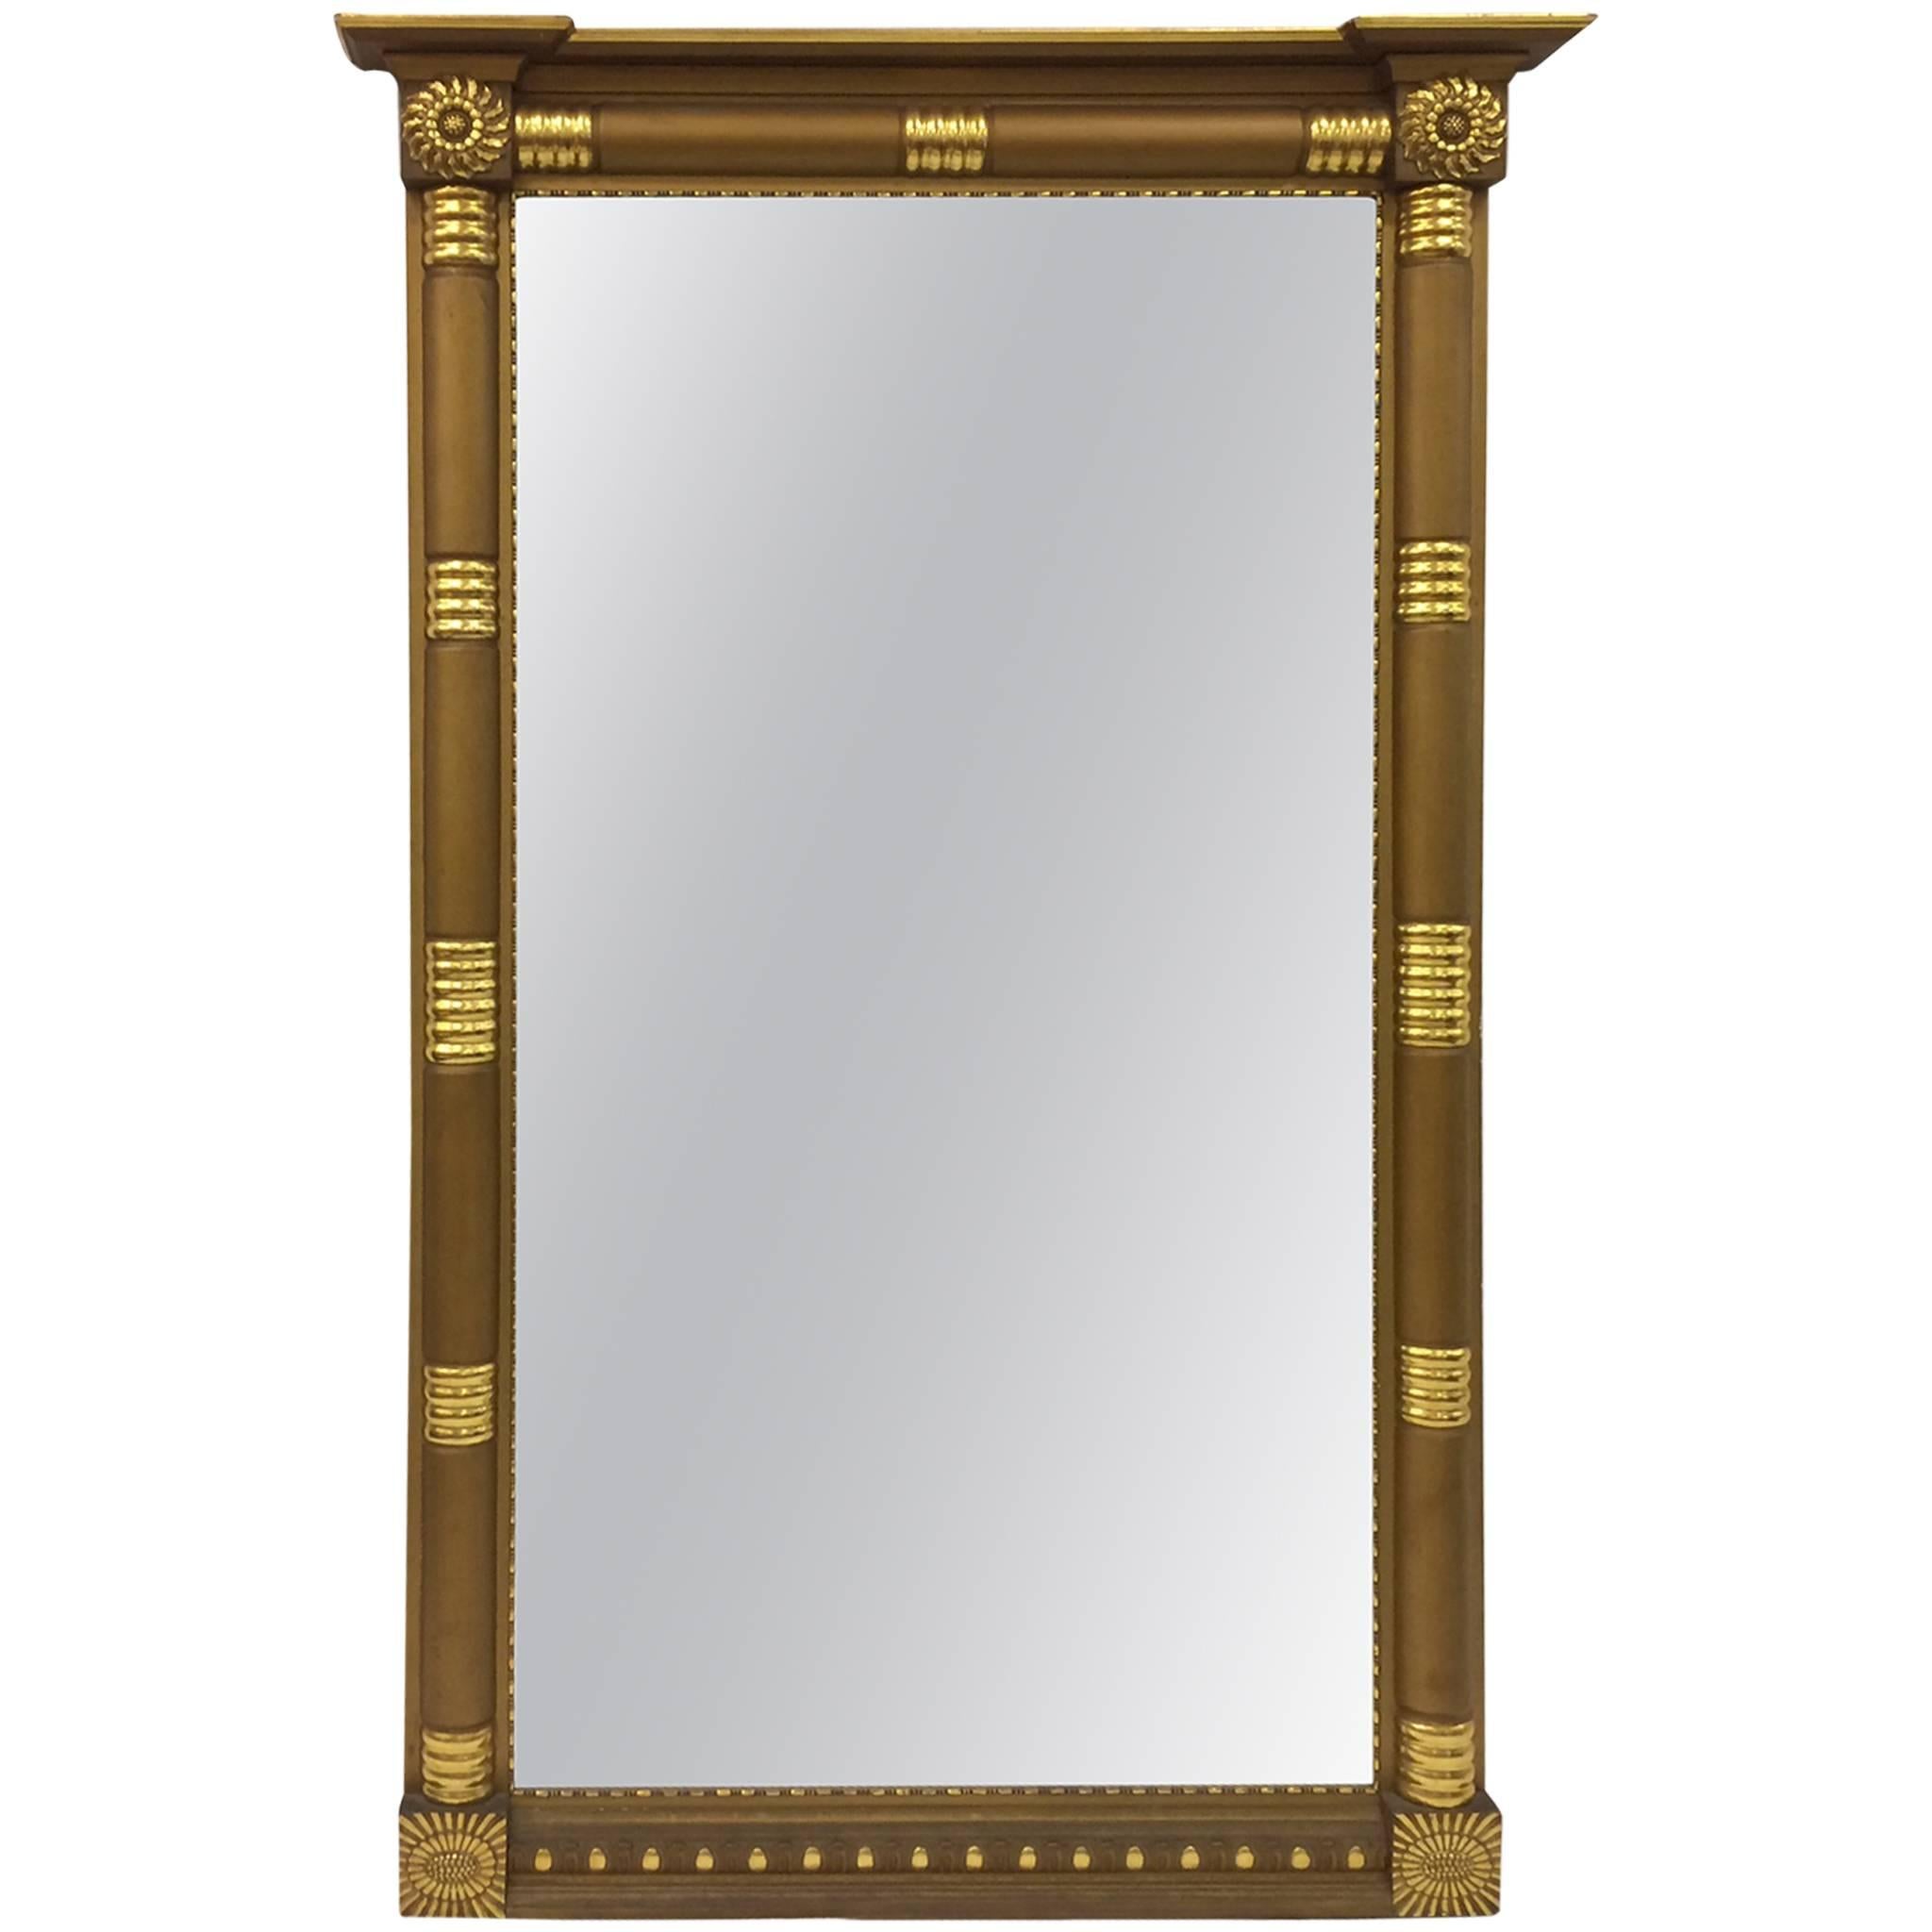 Very Large Early American Gold Wooden Mantle Mirror For Sale